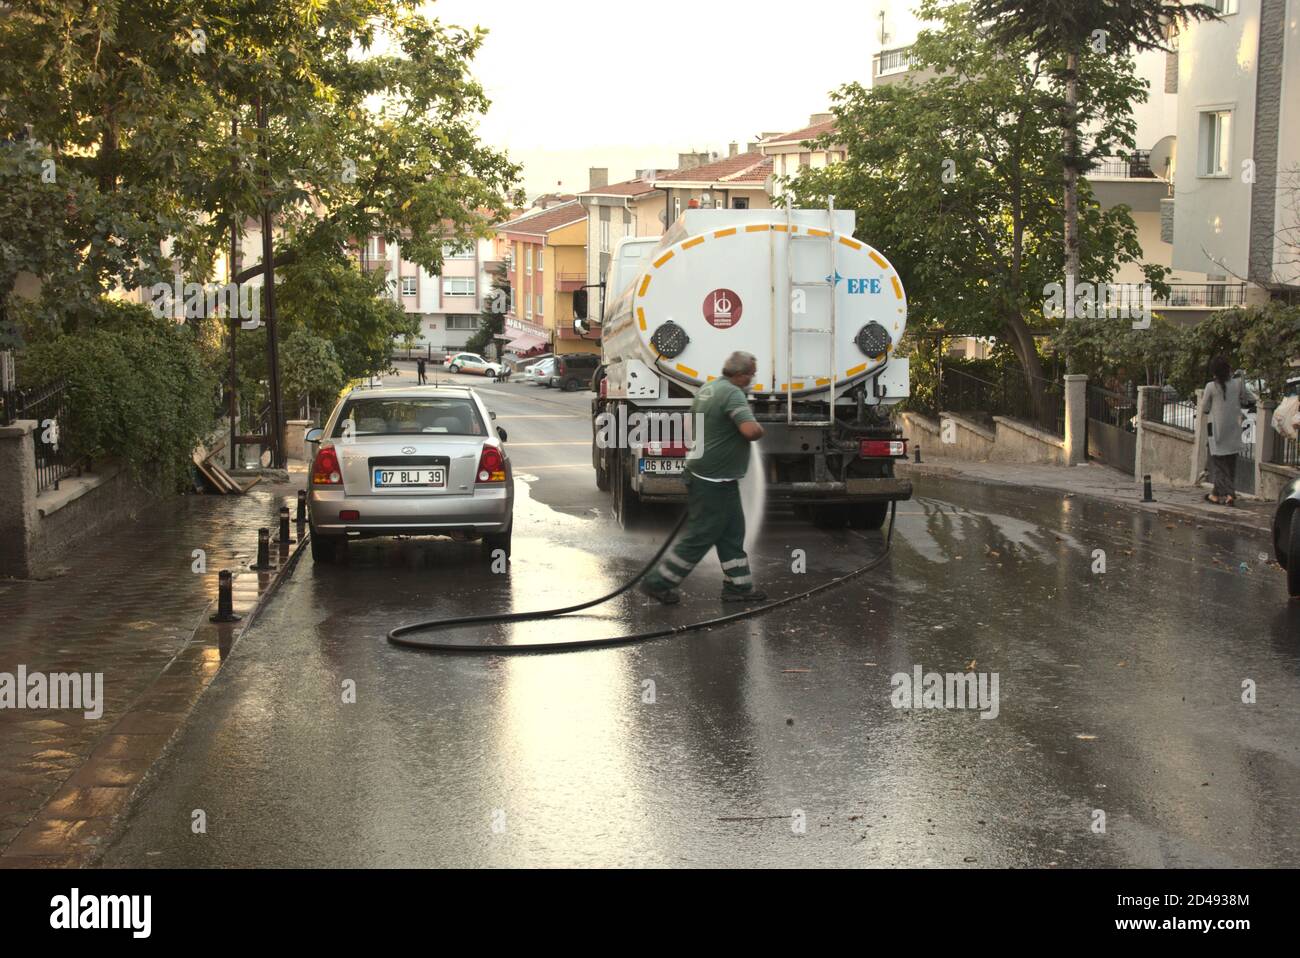 Ankara/Turkey - 28/09/2020 Male worker washing and disinfecting a street with a hose connected to the container Stock Photo